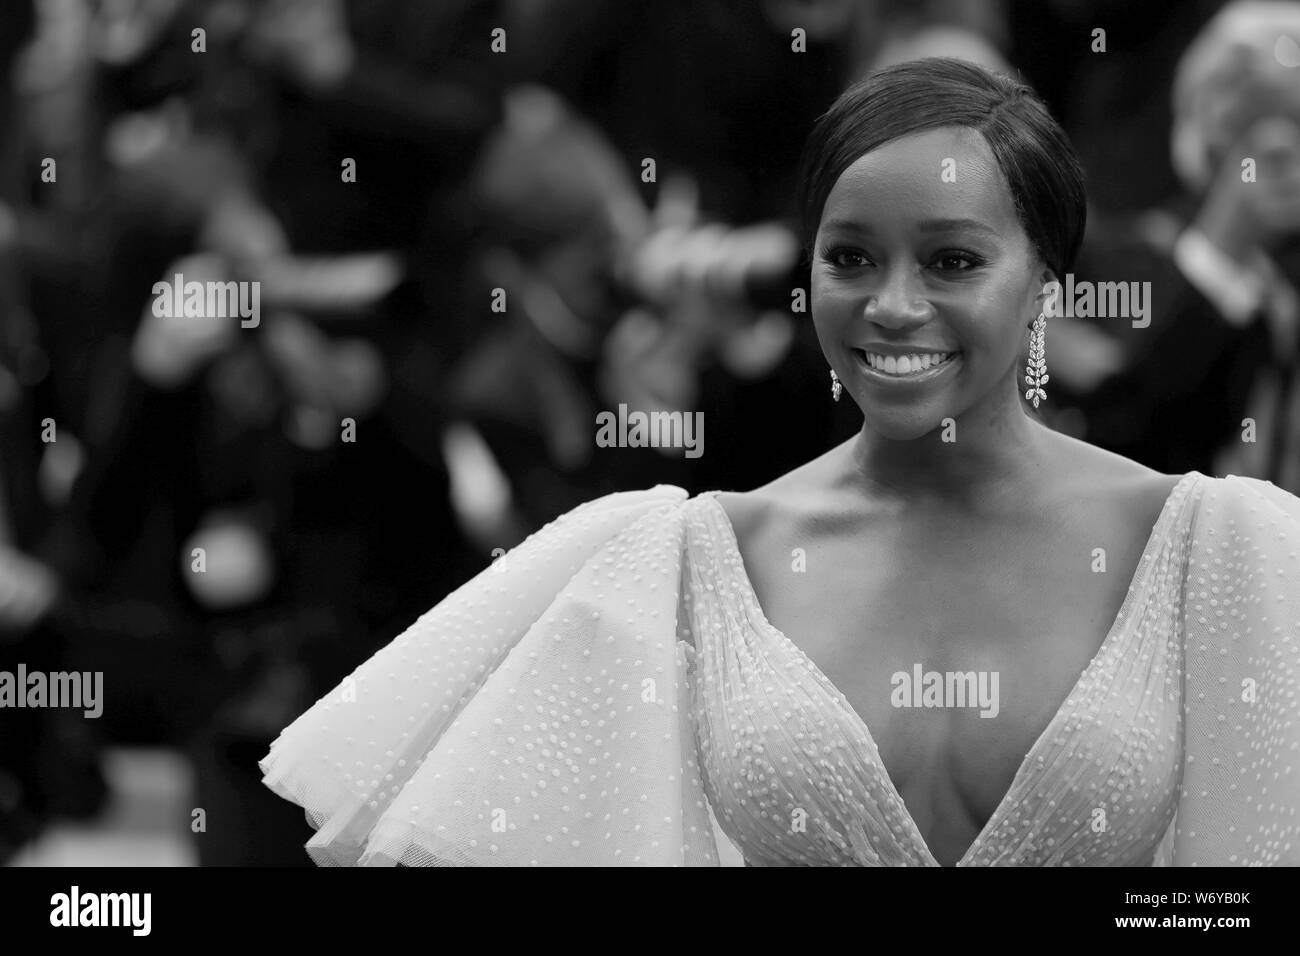 CANNES, FRANCE - MAY 19: Aja Naomi King attends A Hidden Life screening during the 72nd Cannes Film Festival (Mickael Chavet) Stock Photo